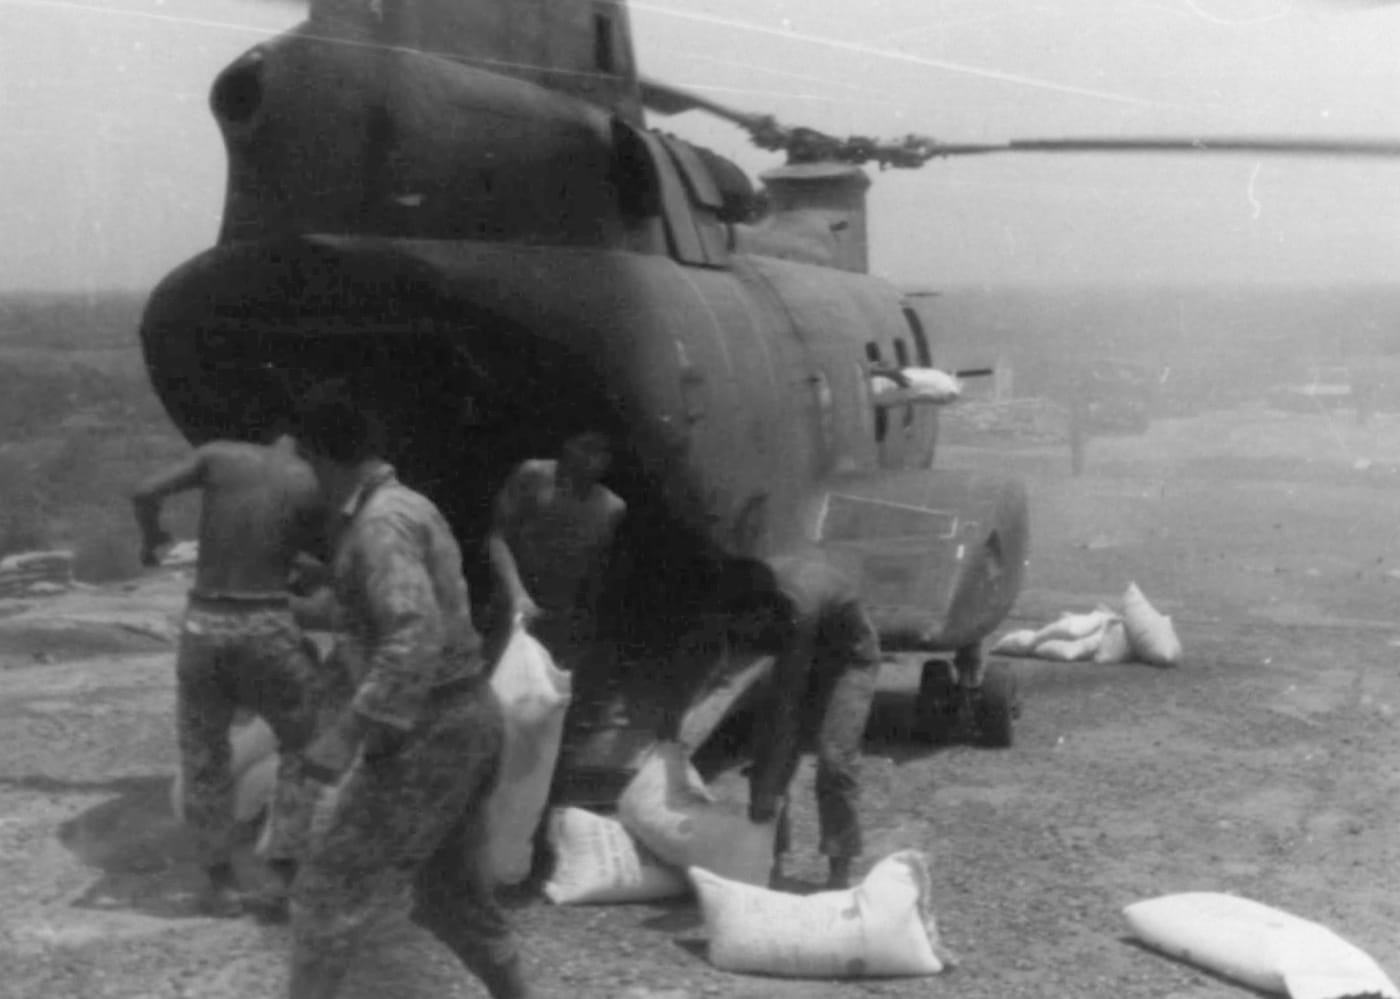 In this photo, ROK Marines unload a Boeing Vertol CH-46 Sea Knight helicopter from the United States Marine Corps that delivered supplies like food, rice, ammunition, water, and medical supplies. Things like first aid kits, bullets, mines and grenades were needed to fight North Korean soldier infiltrators attempting to overthrow the legitimate government of South Vietnam.